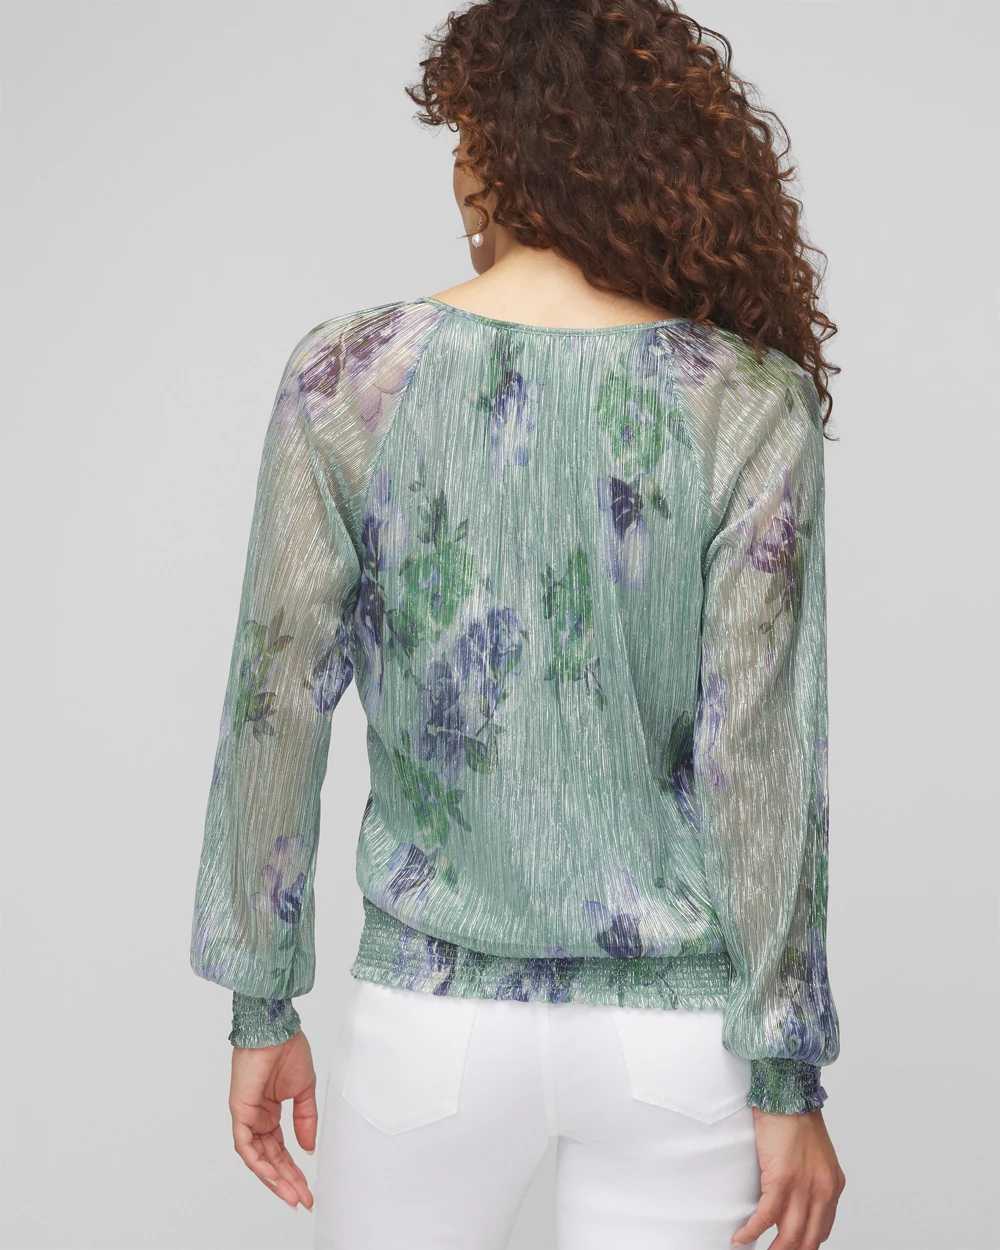 Long Sleeve Metallic Printed Top click to view larger image.